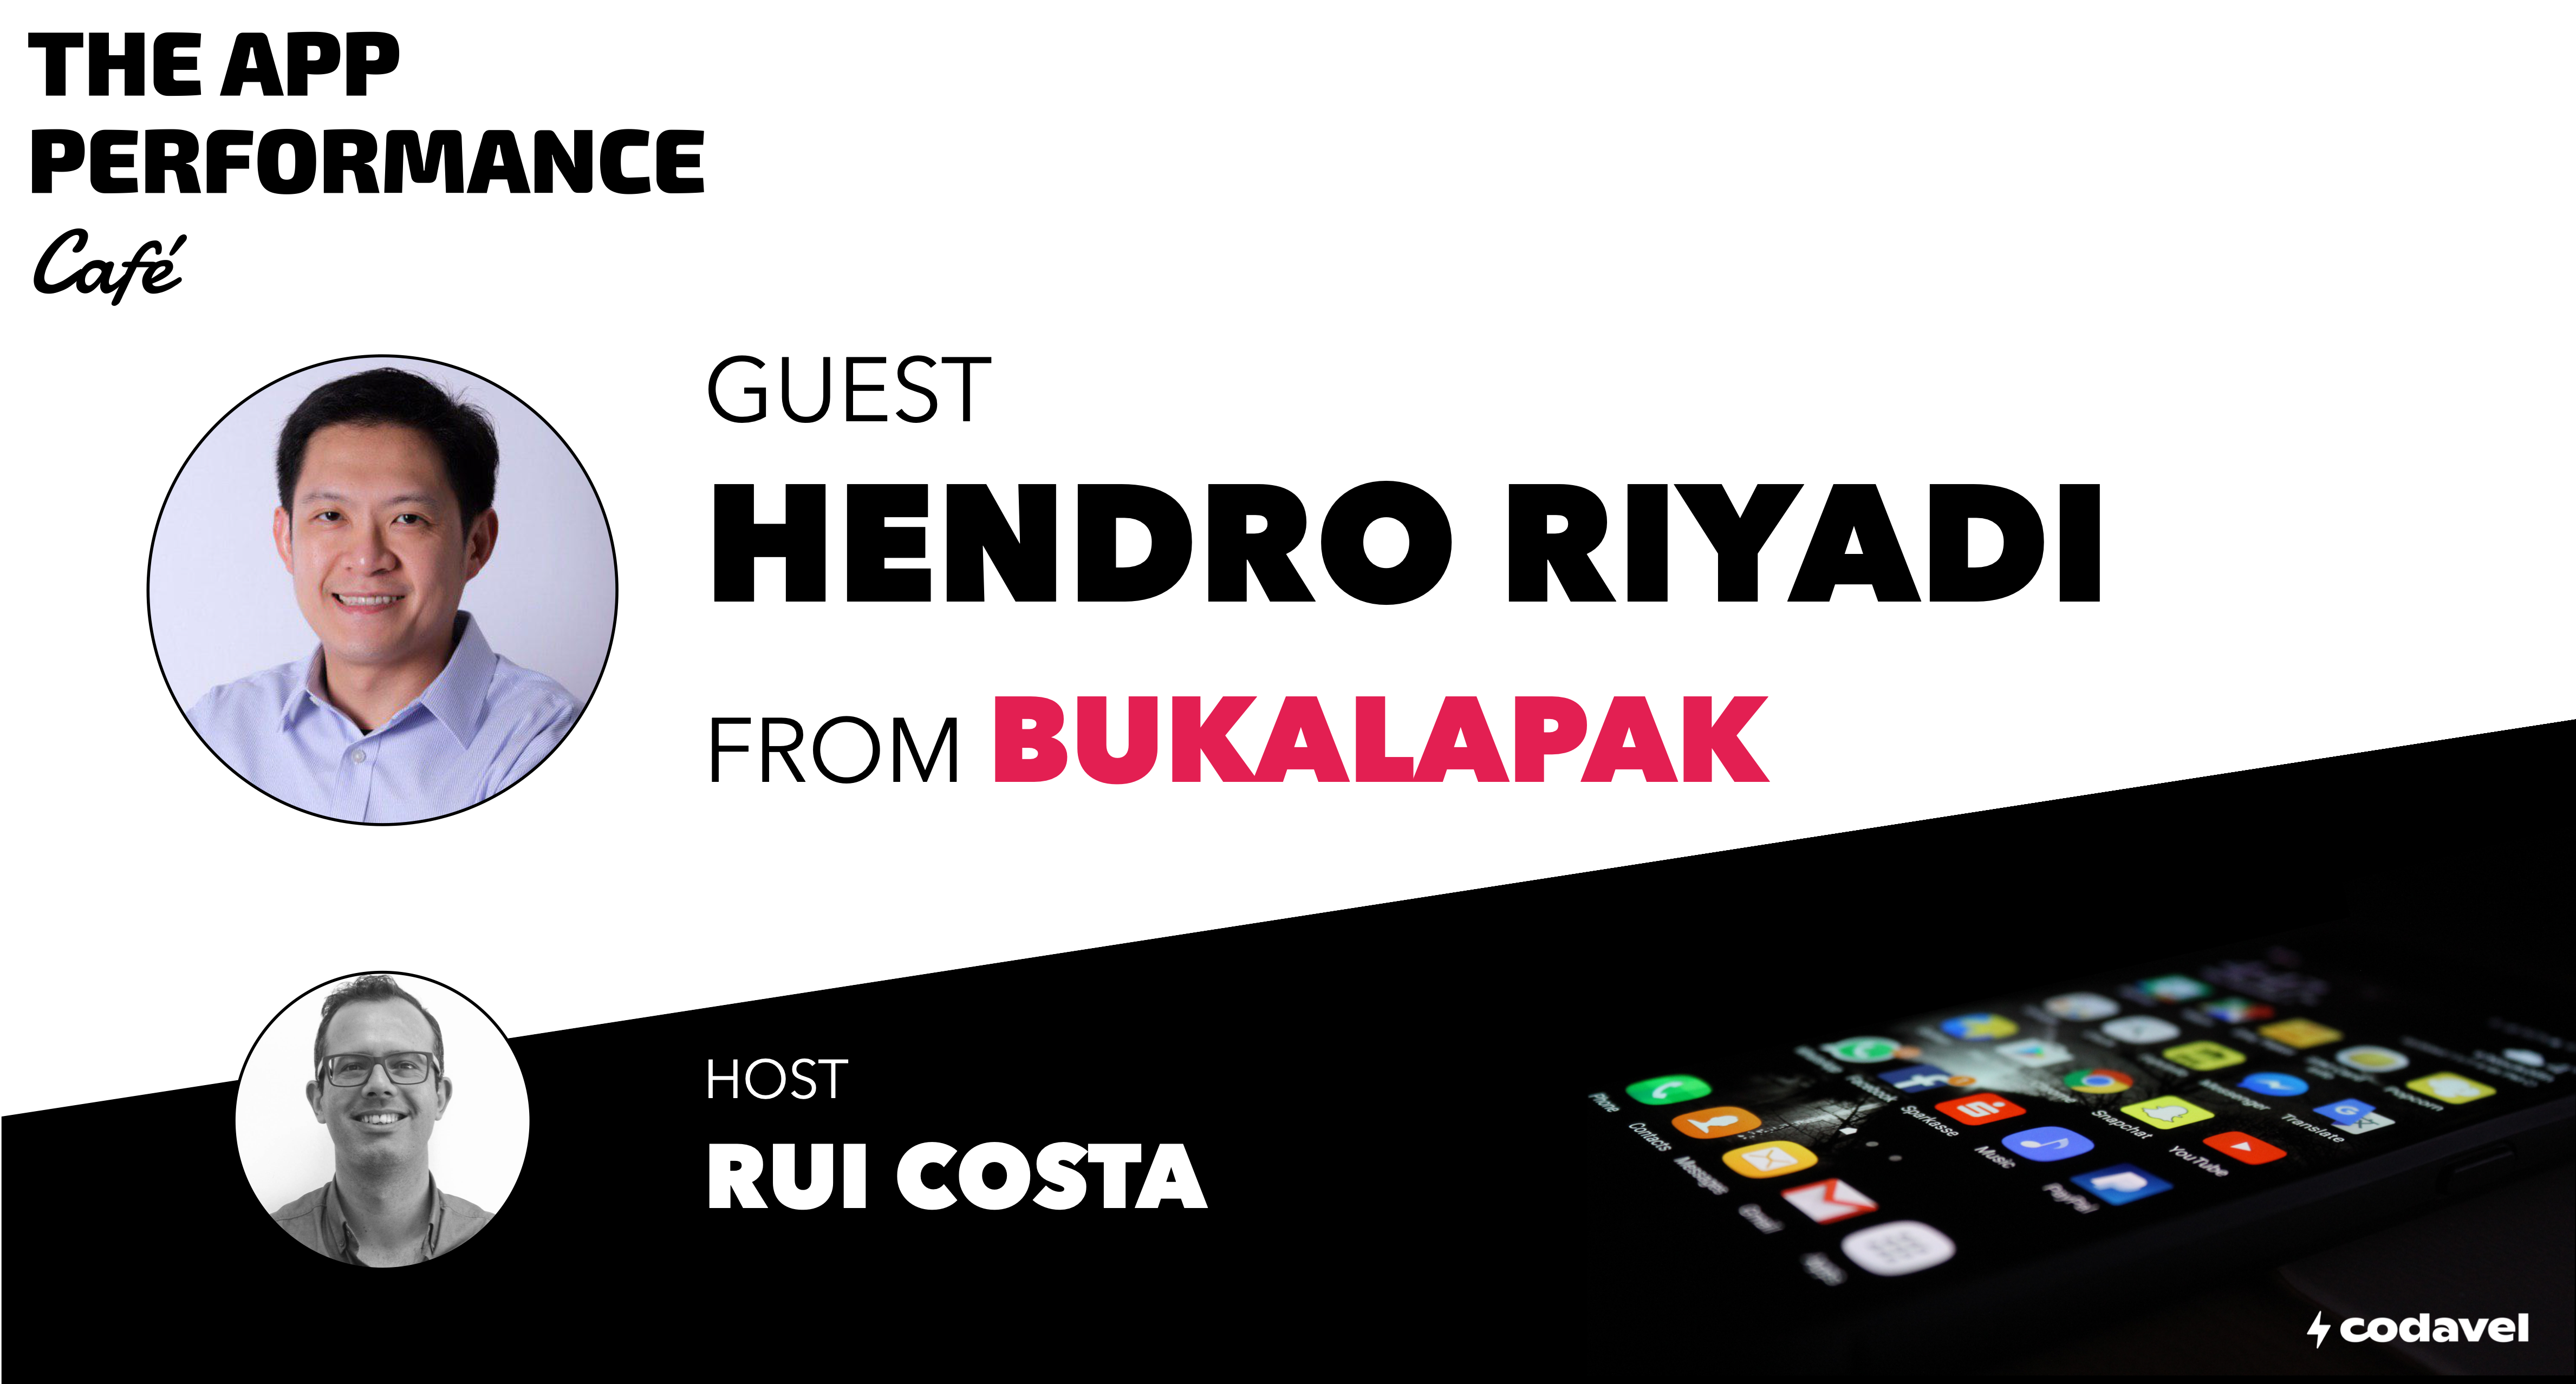 Café with Hendro from Bukalapak, on super apps and their performance